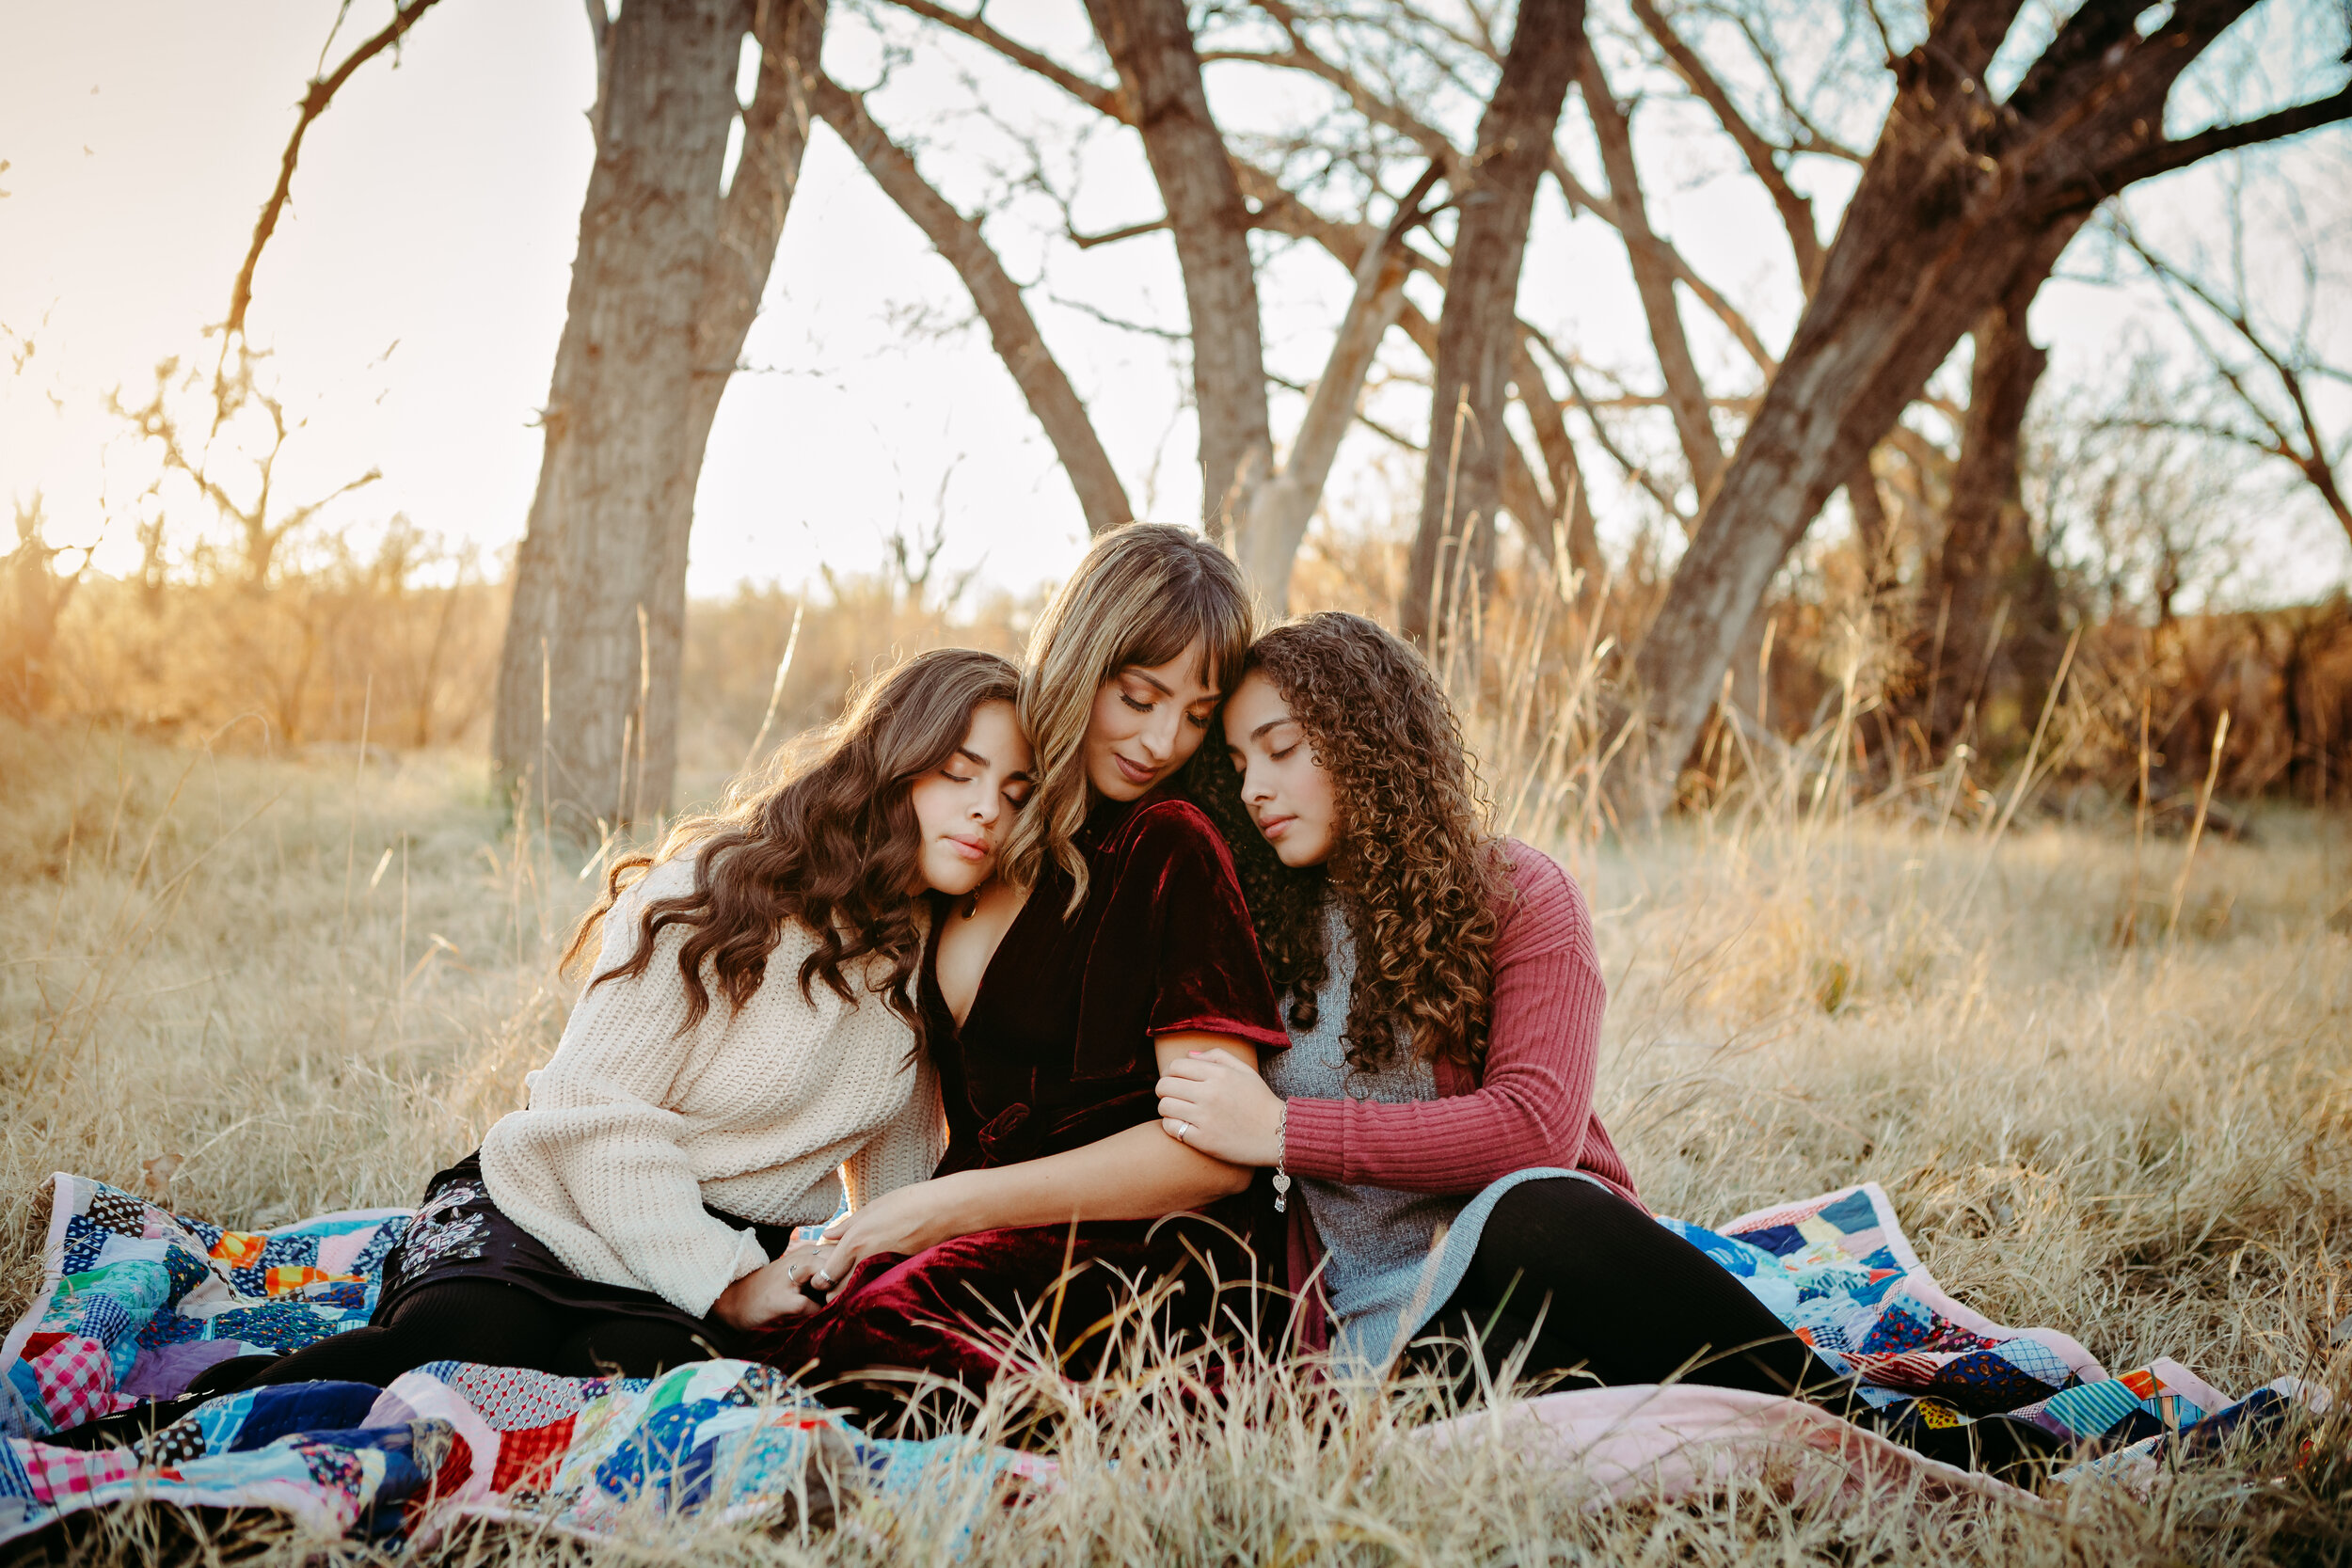  This beautiful mom and her girls were completely in sync for their photo session #tealawardphotography #texasfamilyphotographer #amarillophotographer #amarillofamilyphotographer #lifestylephotography #fallphotos #familyphotoshoot #family #lovingsiblings #families #familyphotos #naturalfamilyinteraction 